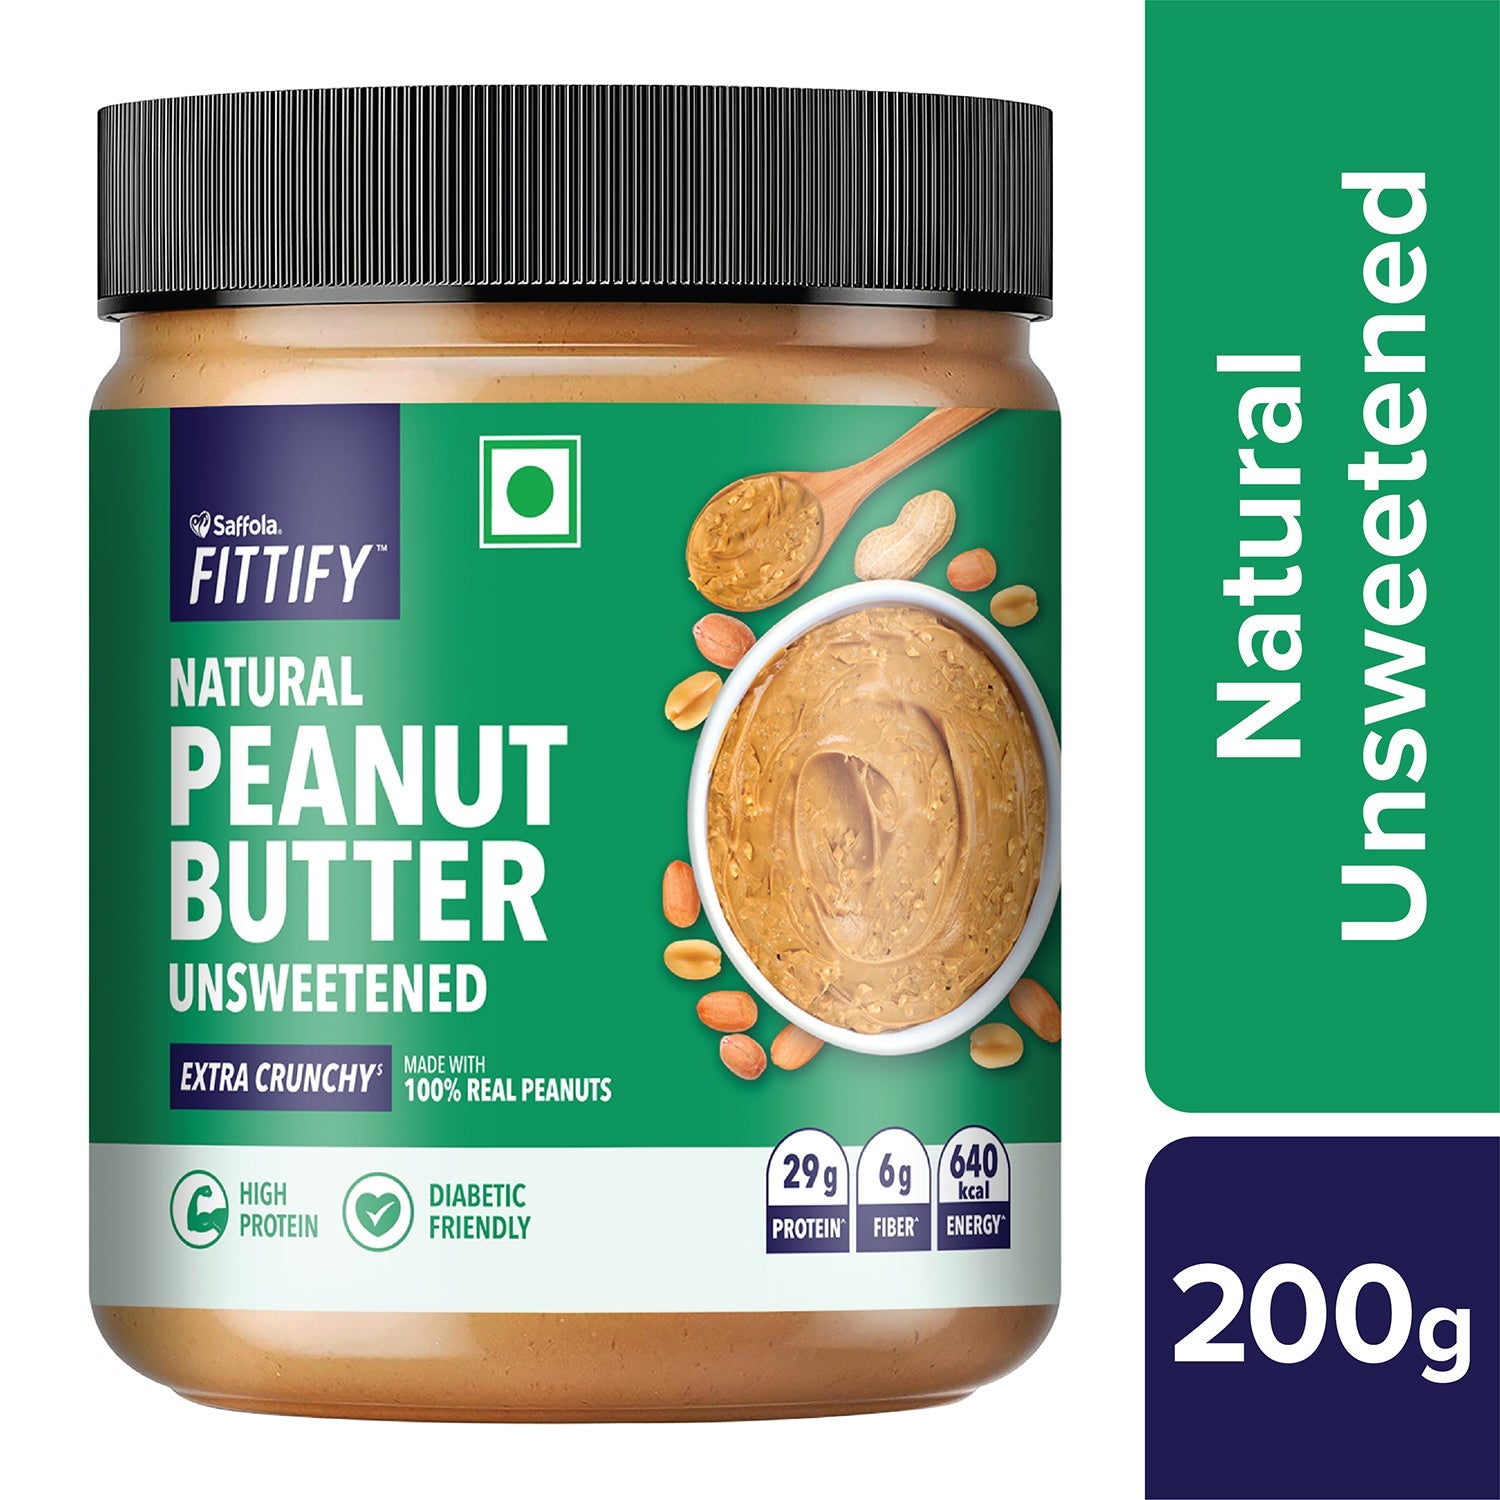 [SALE] Saffola Fittify Natural Peanut Butter Unsweetened Extra Crunchy 200g